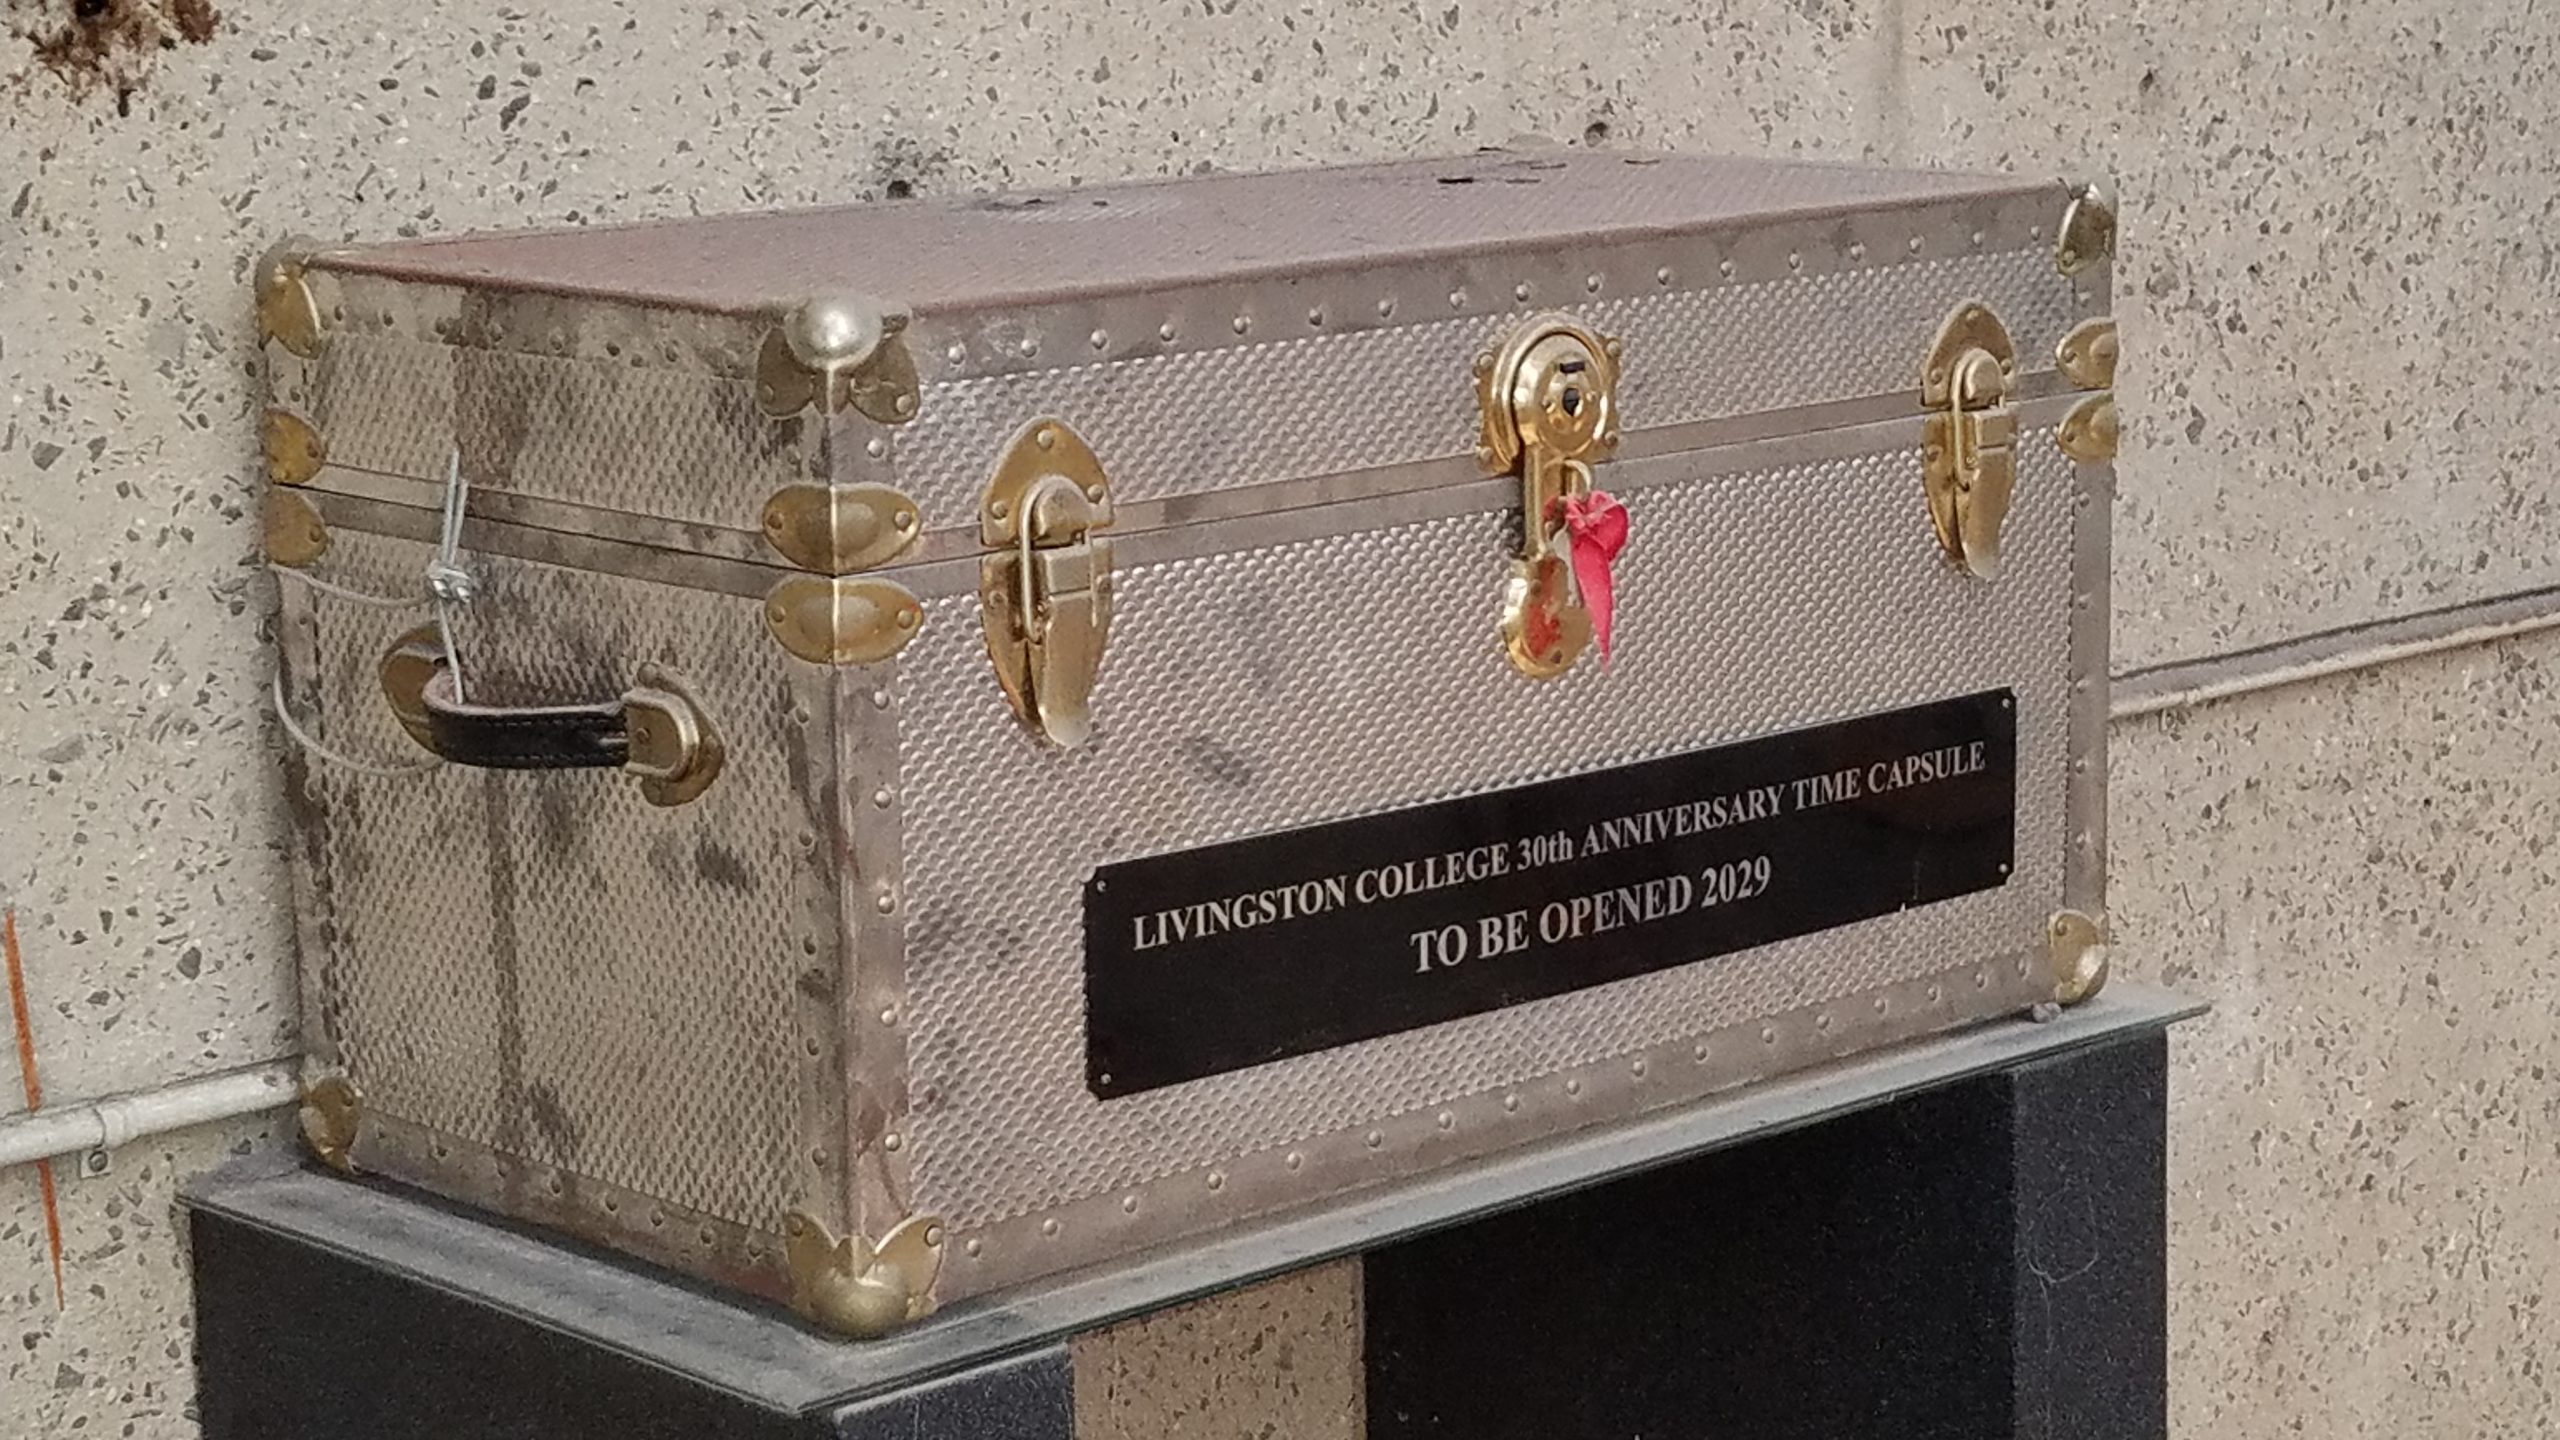 The Livingston College time capsule, as seen in 2019.